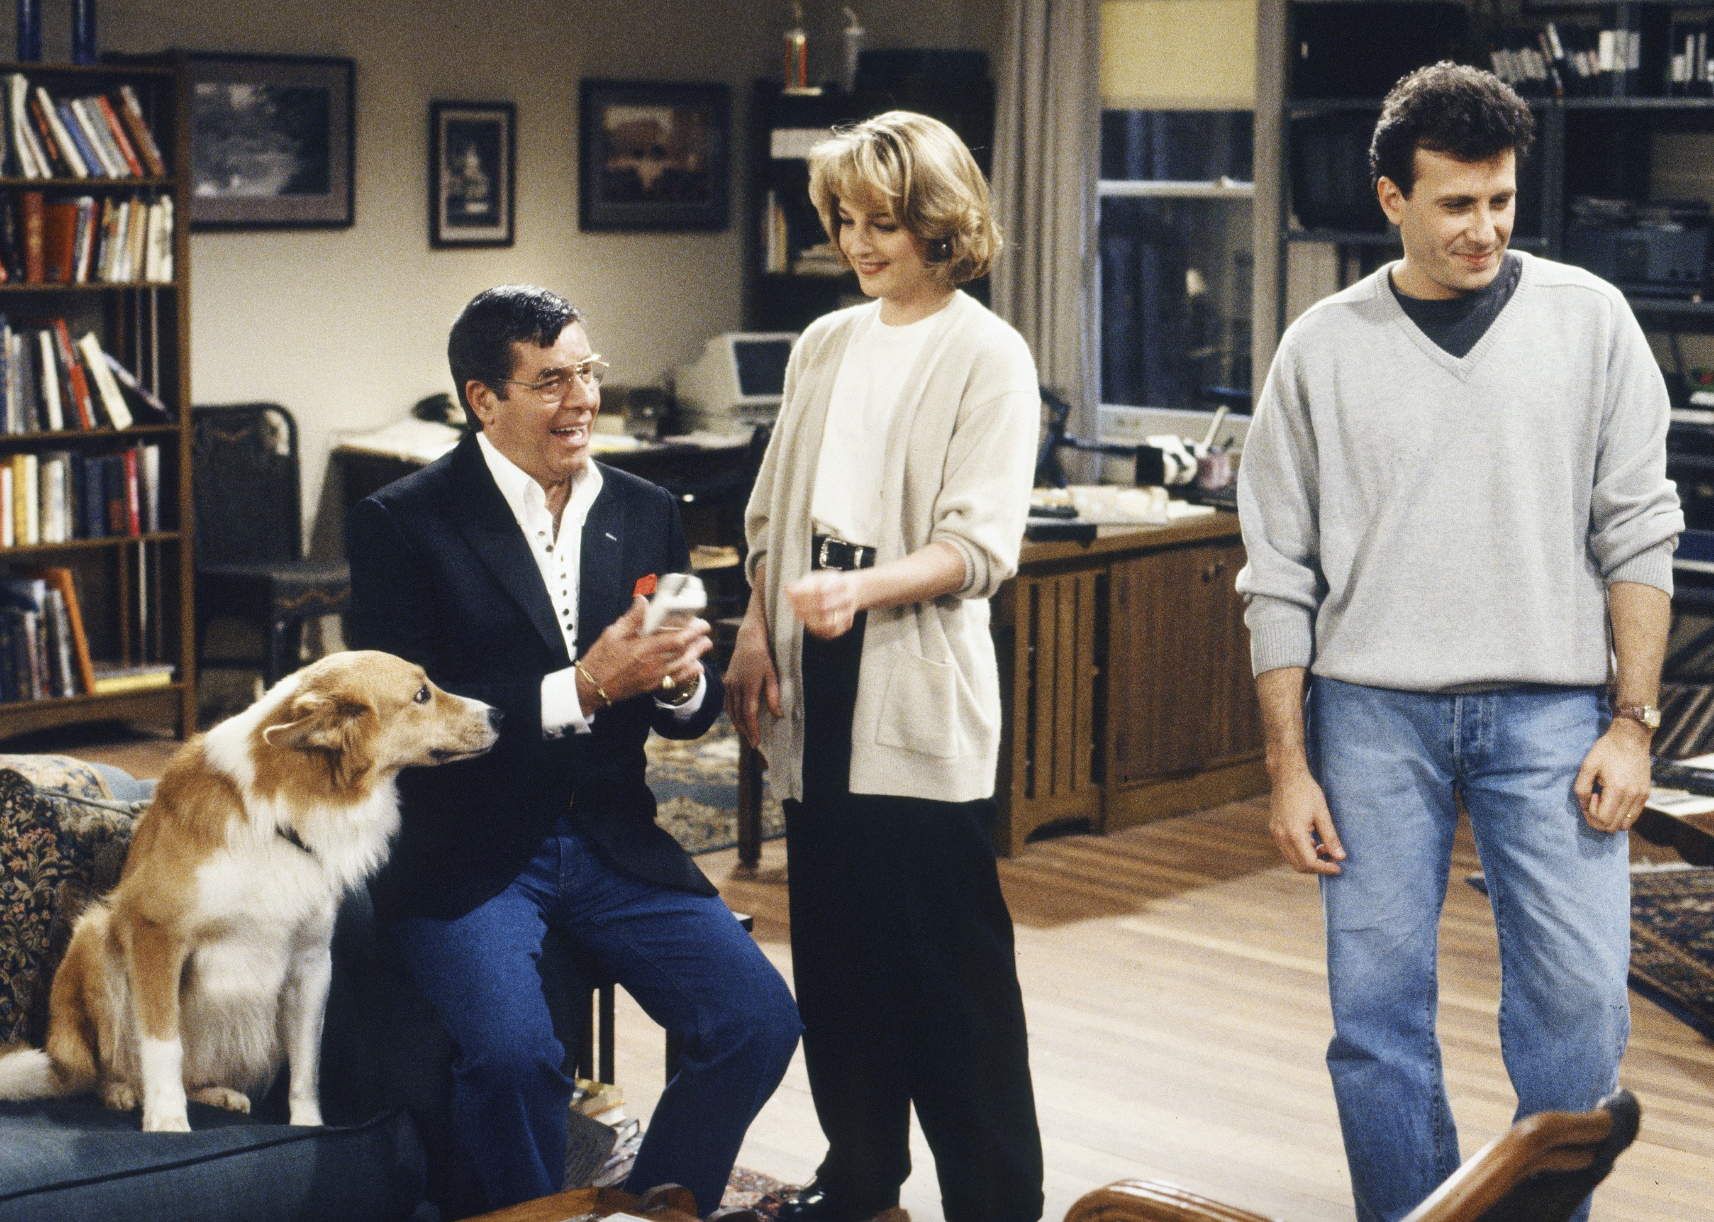 Helen Hunt, Jerry Lewis, Paul Reiser, and Maui in "Mad About You"